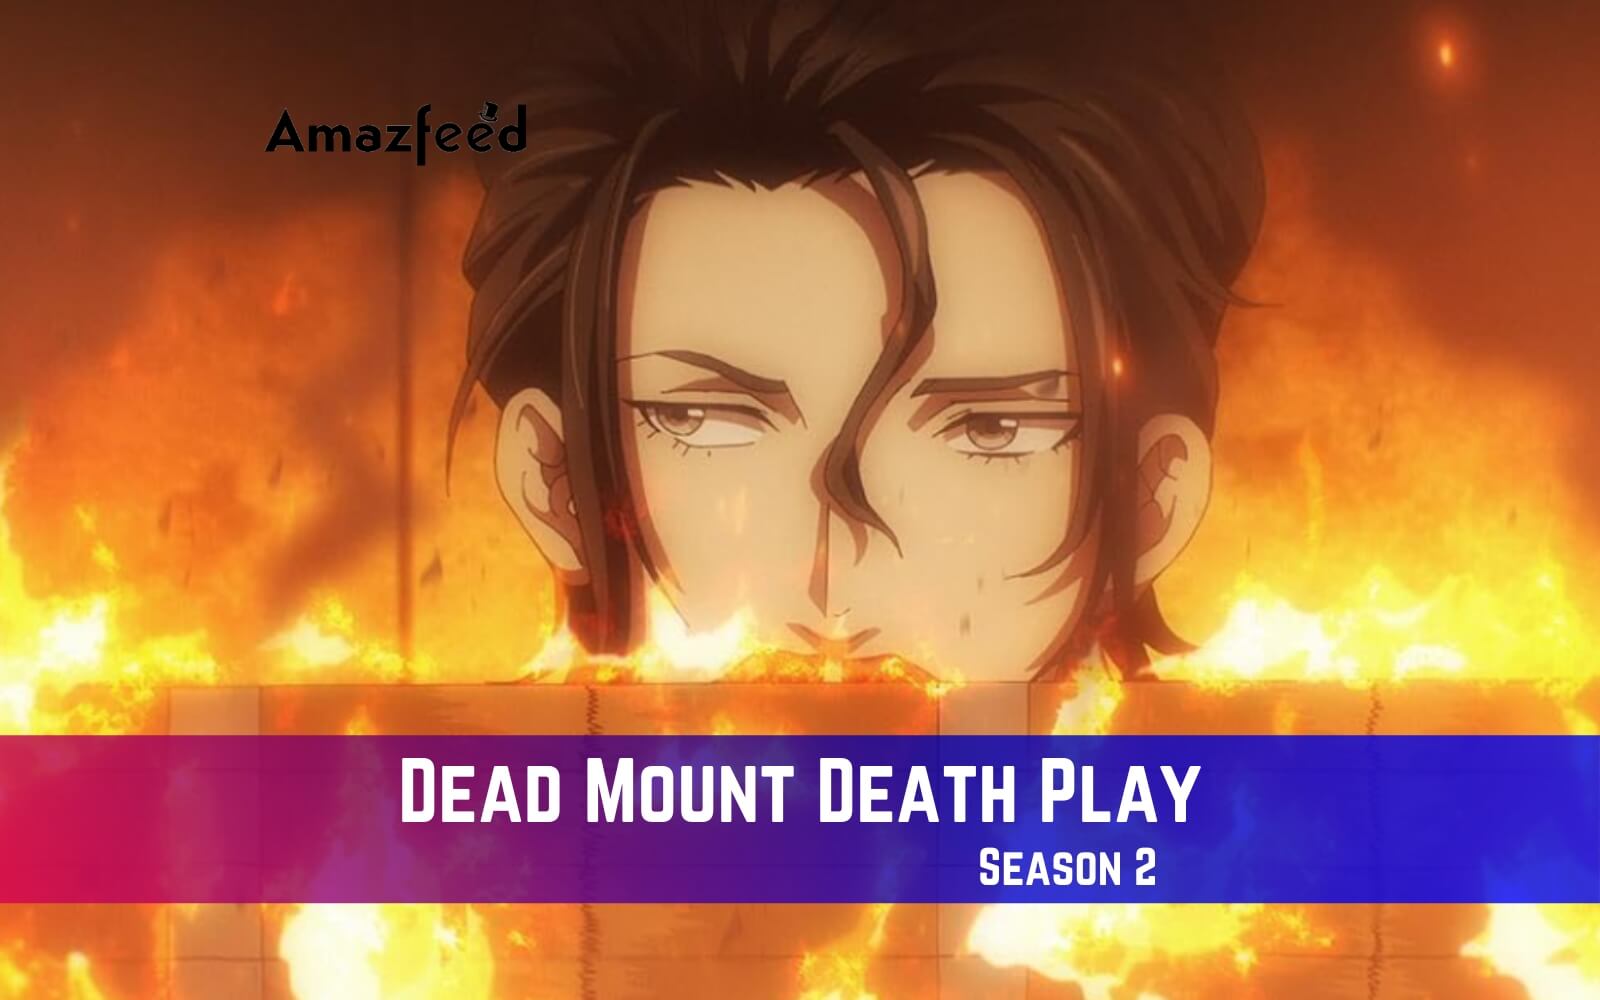 Dead Mount Death Play Season 2: Expected to Release Soon